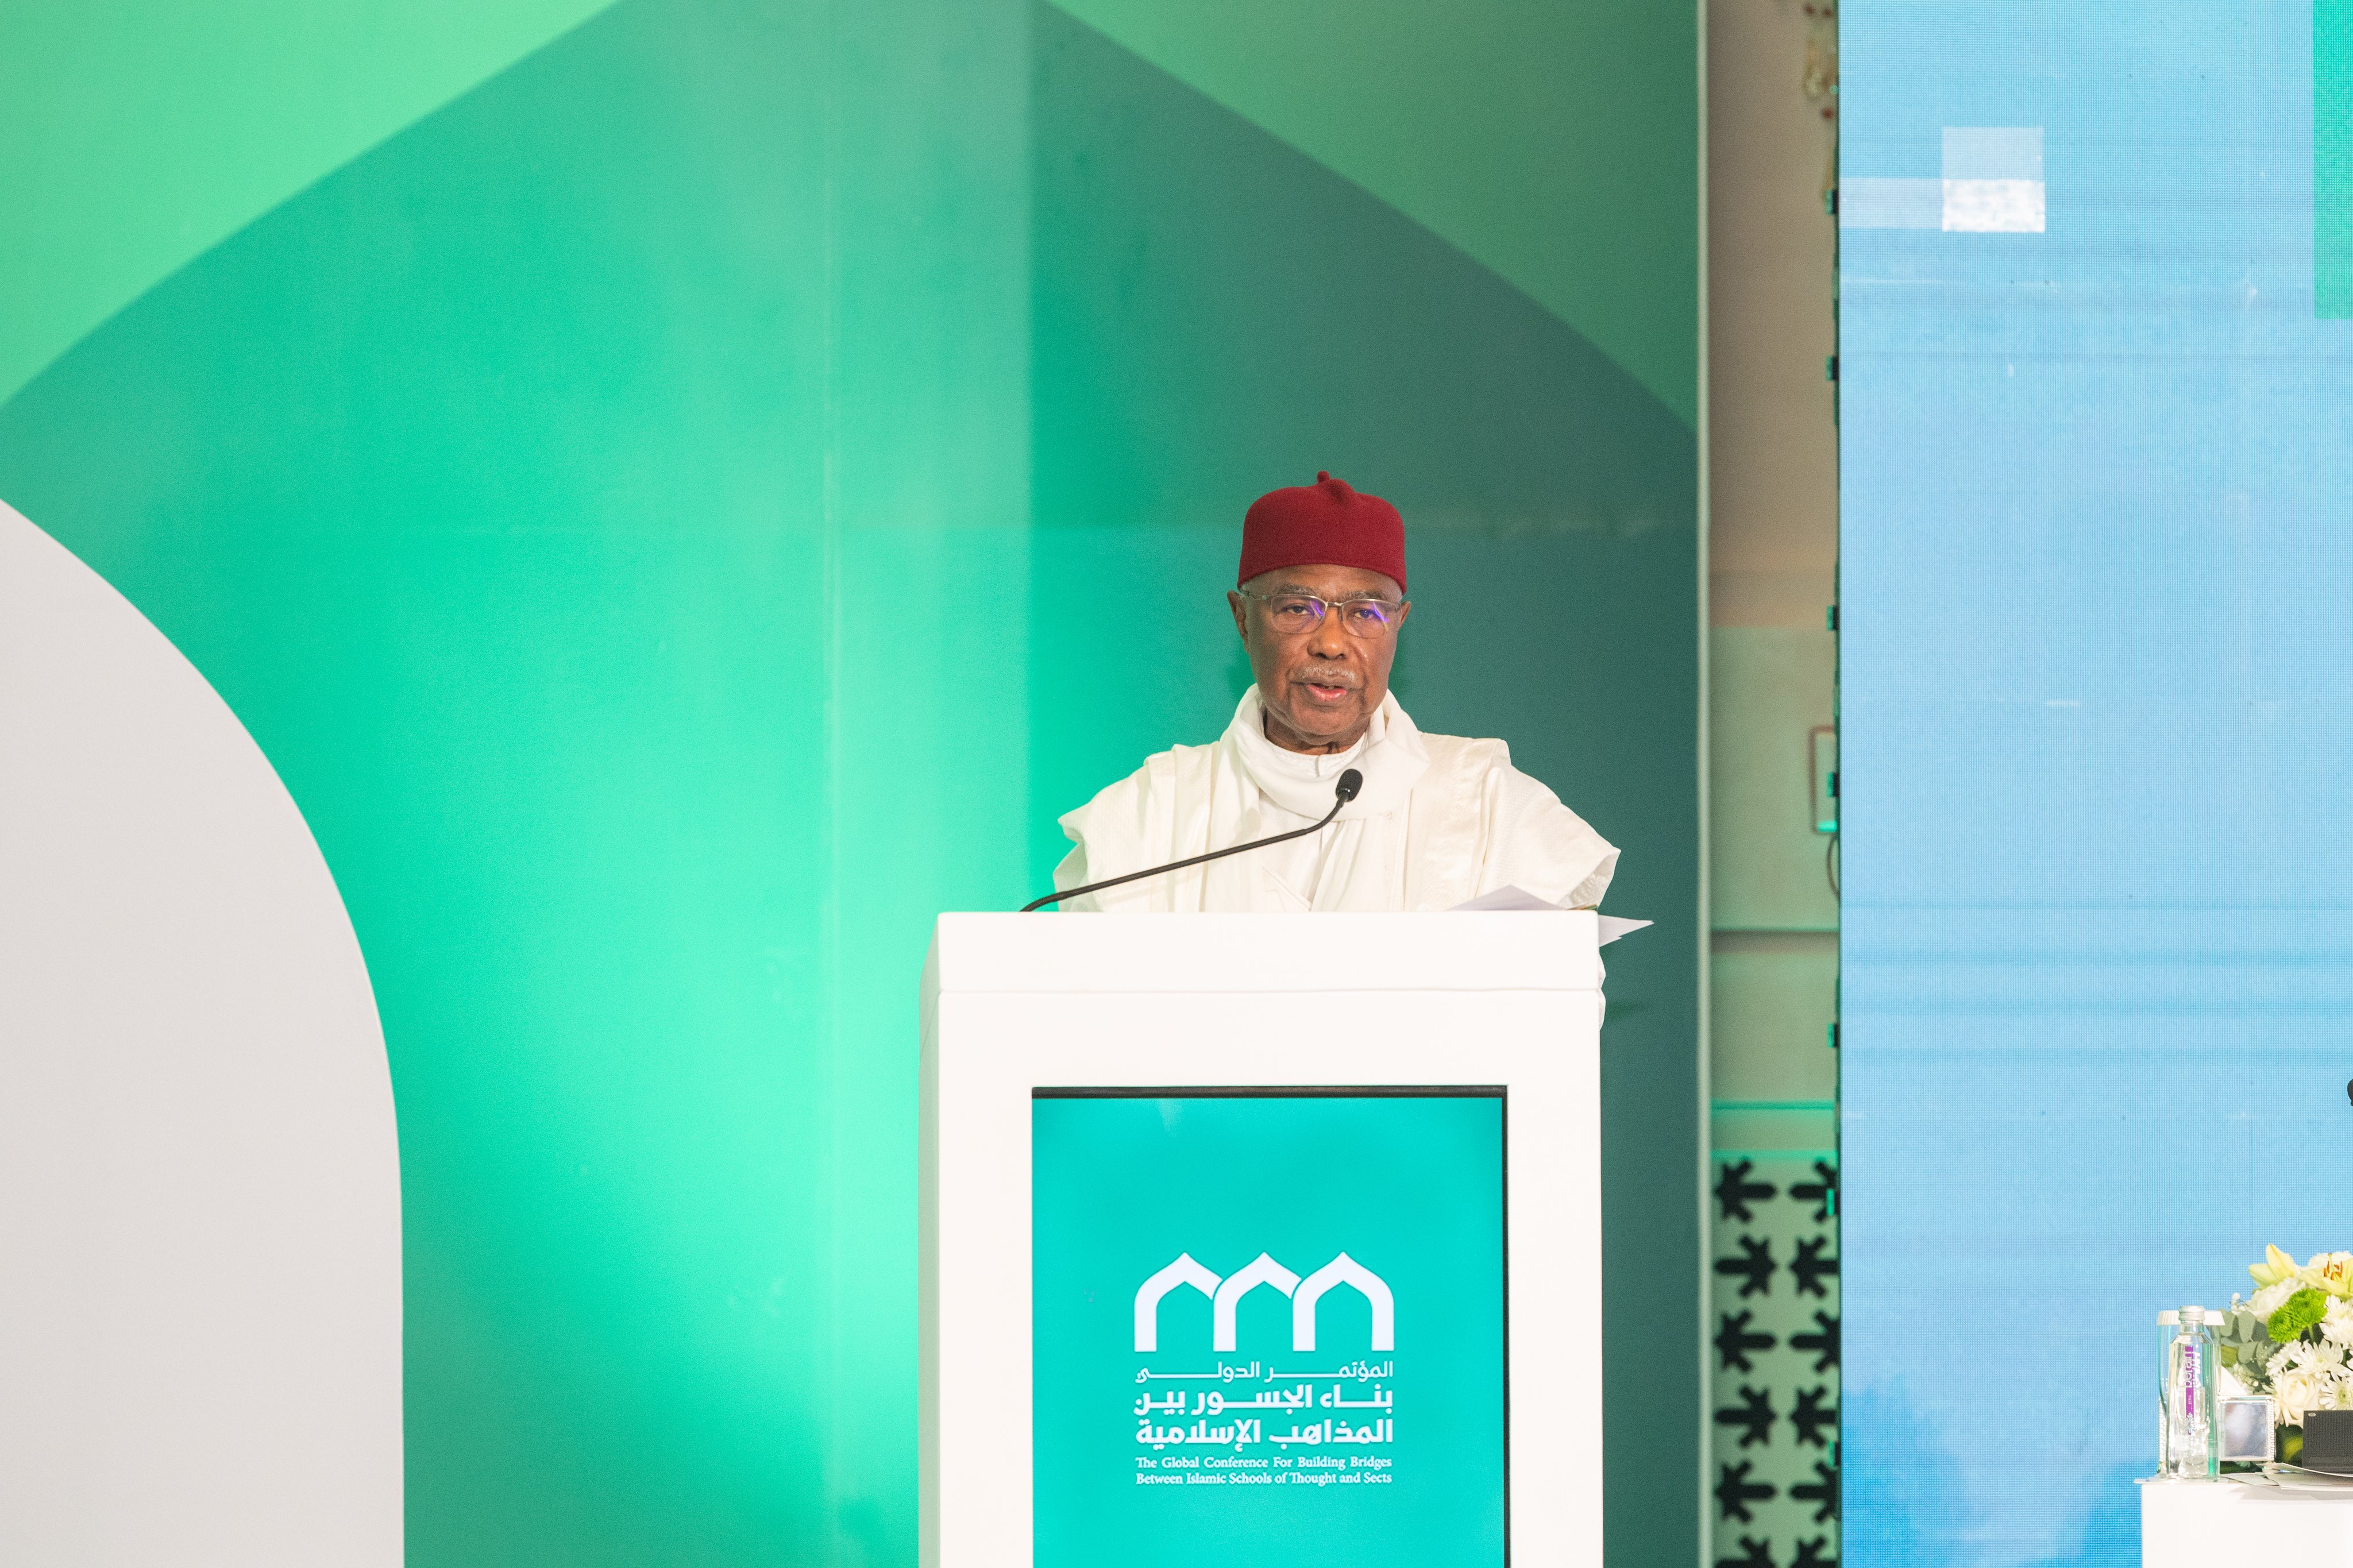 His Excellency Mr. Hissein Brahim Taha, Secretary-General of the Organization of ‎Islamic Cooperation, at the opening ceremony at the Global Conference for Building Bridges between Islamic Schools of Thought and Sects: